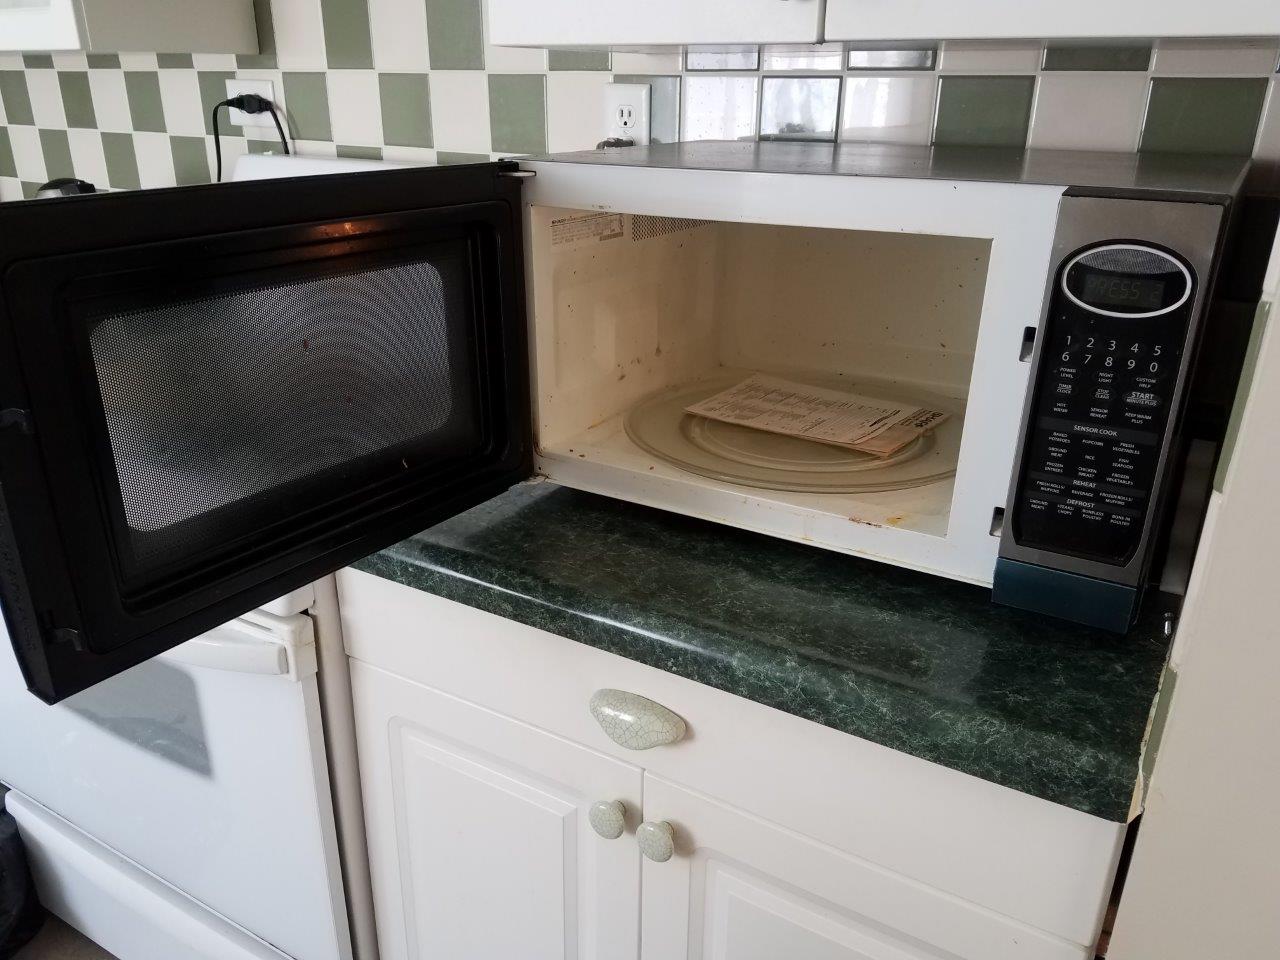 Sharp large spacious stainless steel microwave